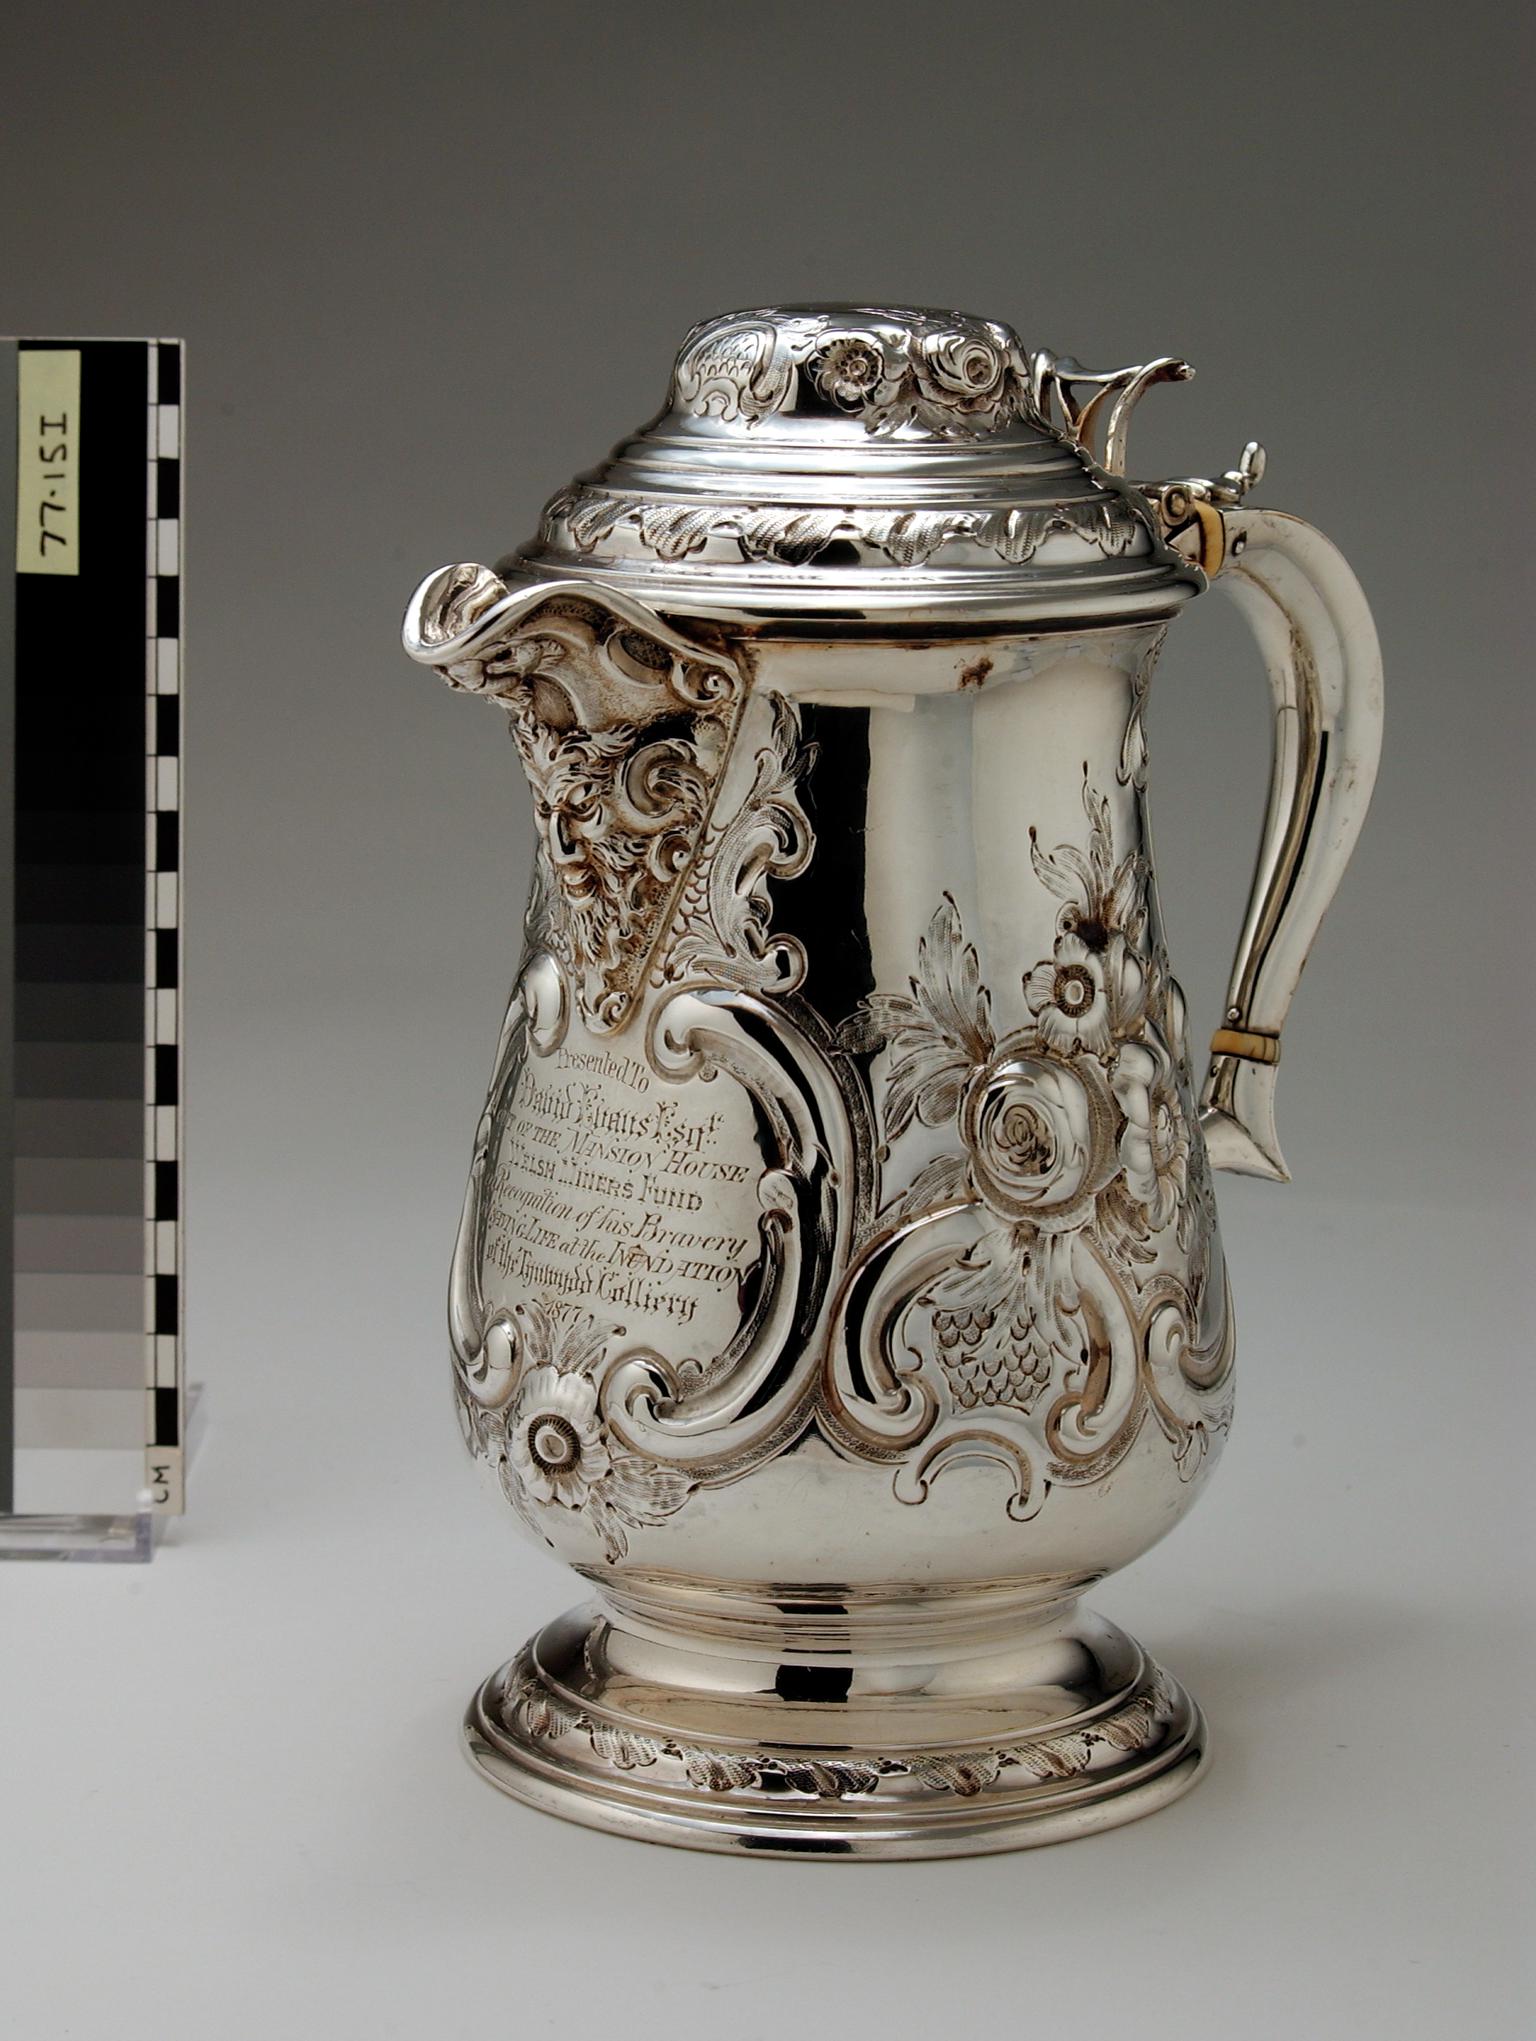 Mansion House Welsh Miners' Fund, silver ewer